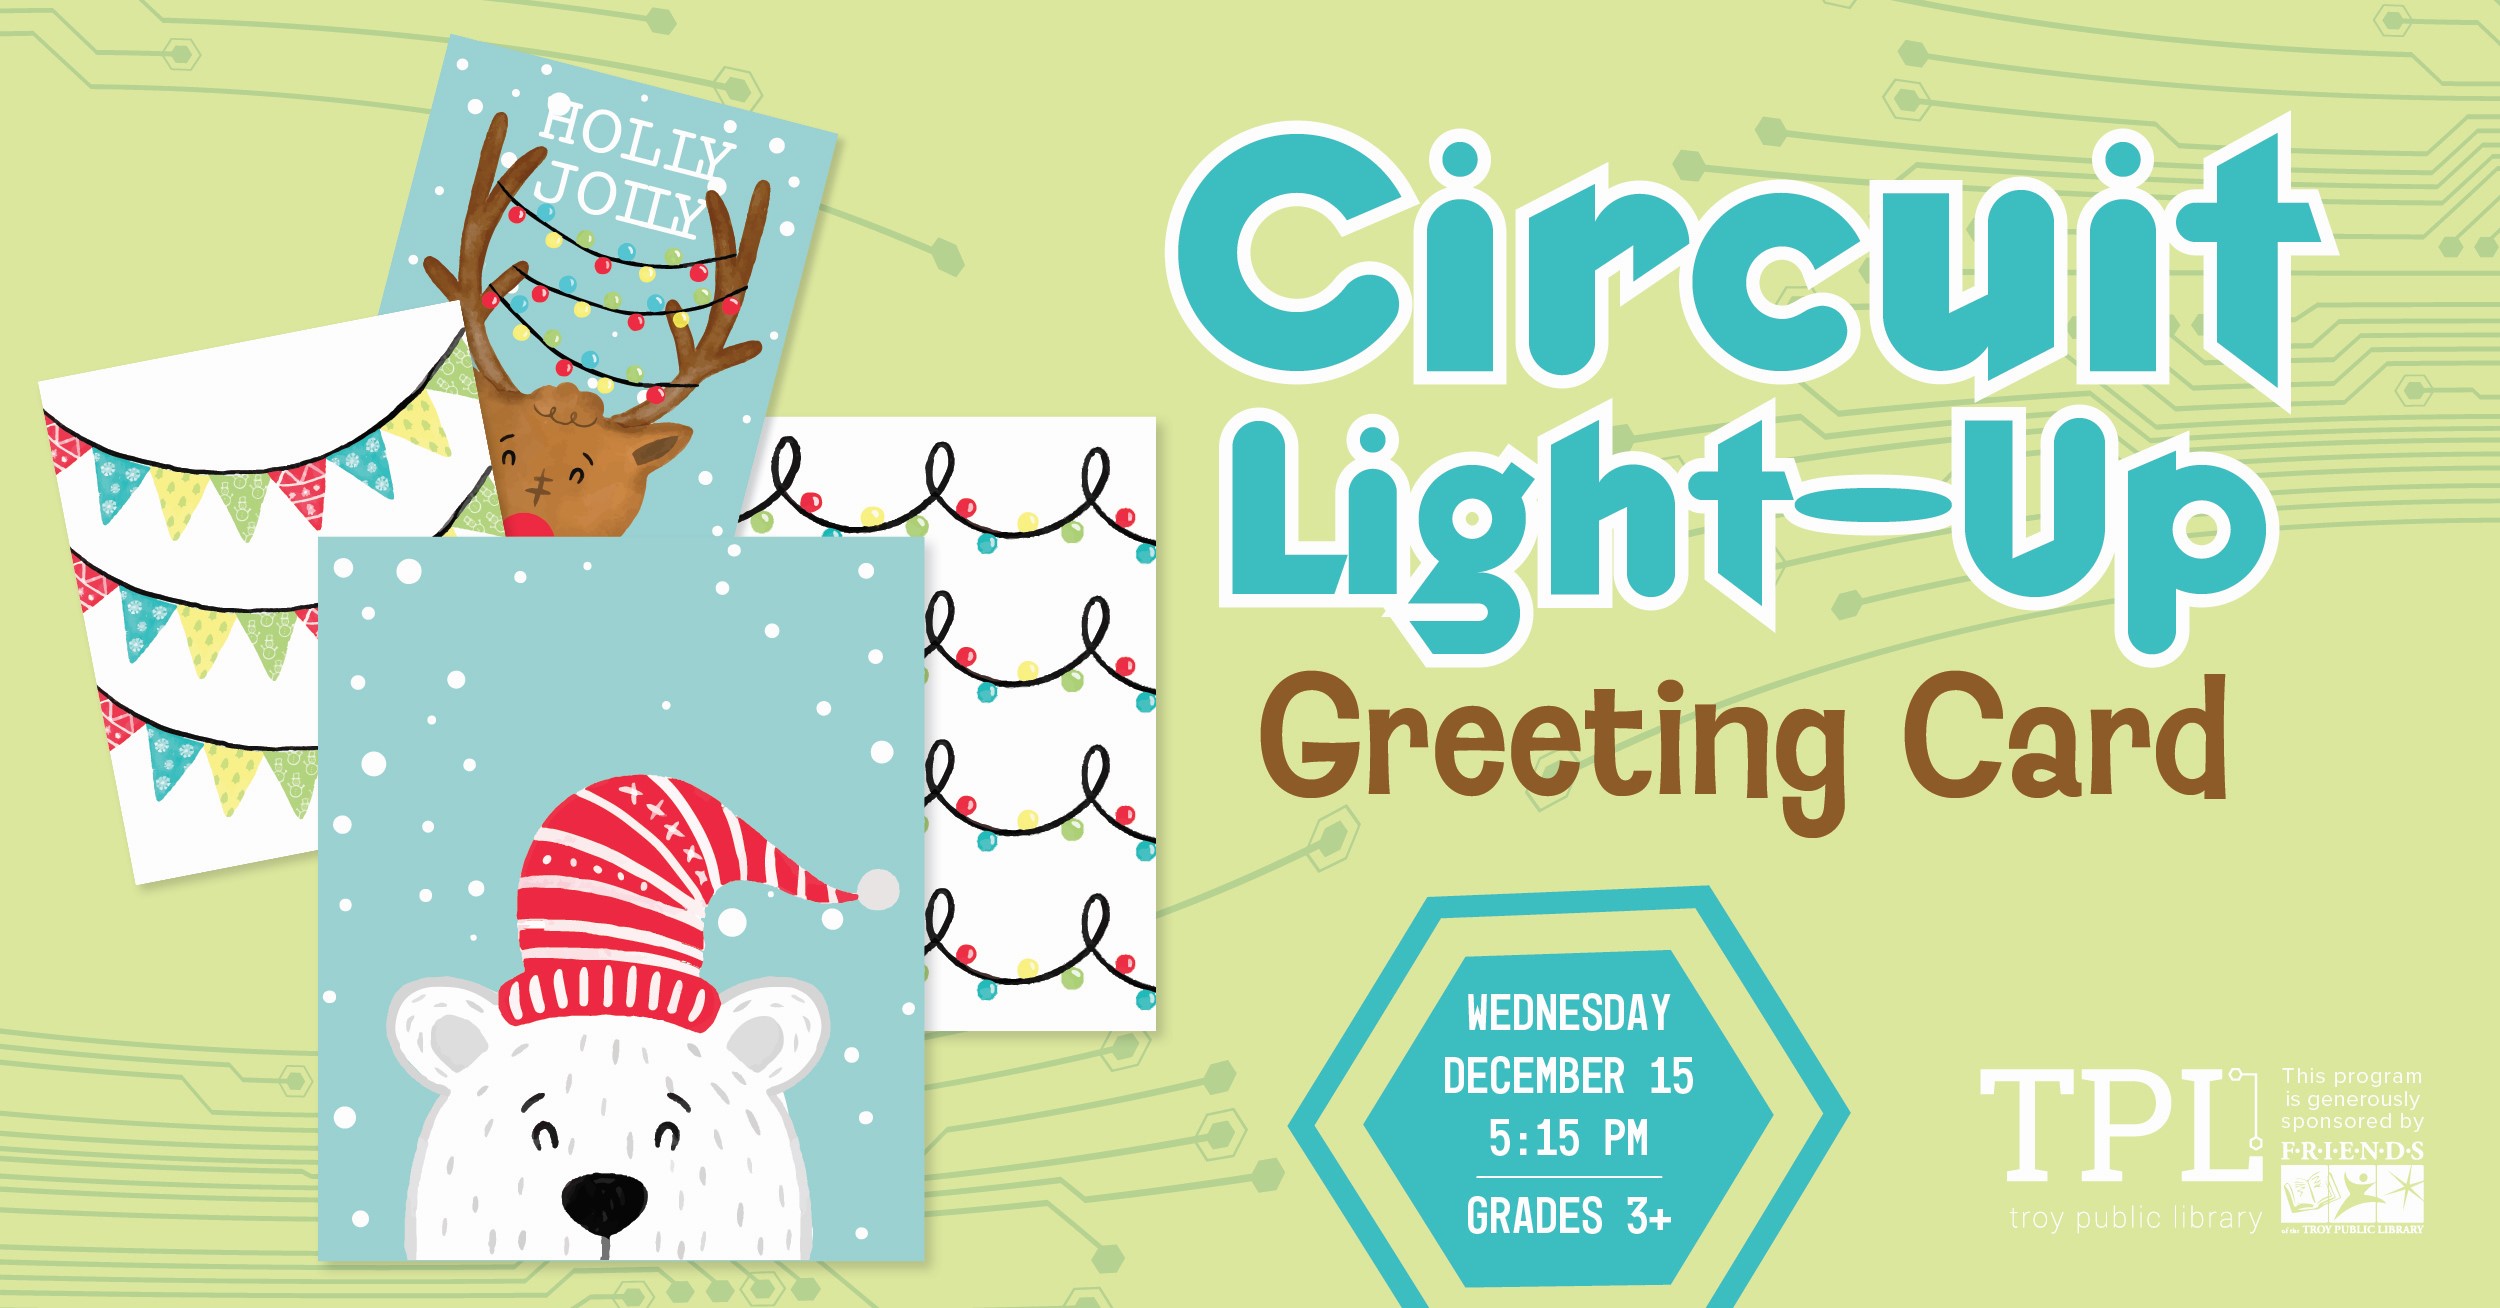 Circuit Light-Up Greeting Cards Wednesday, December 15 at 5:!5pm. Grades 3+ Sponsored by the Friends of the Troy Public Library